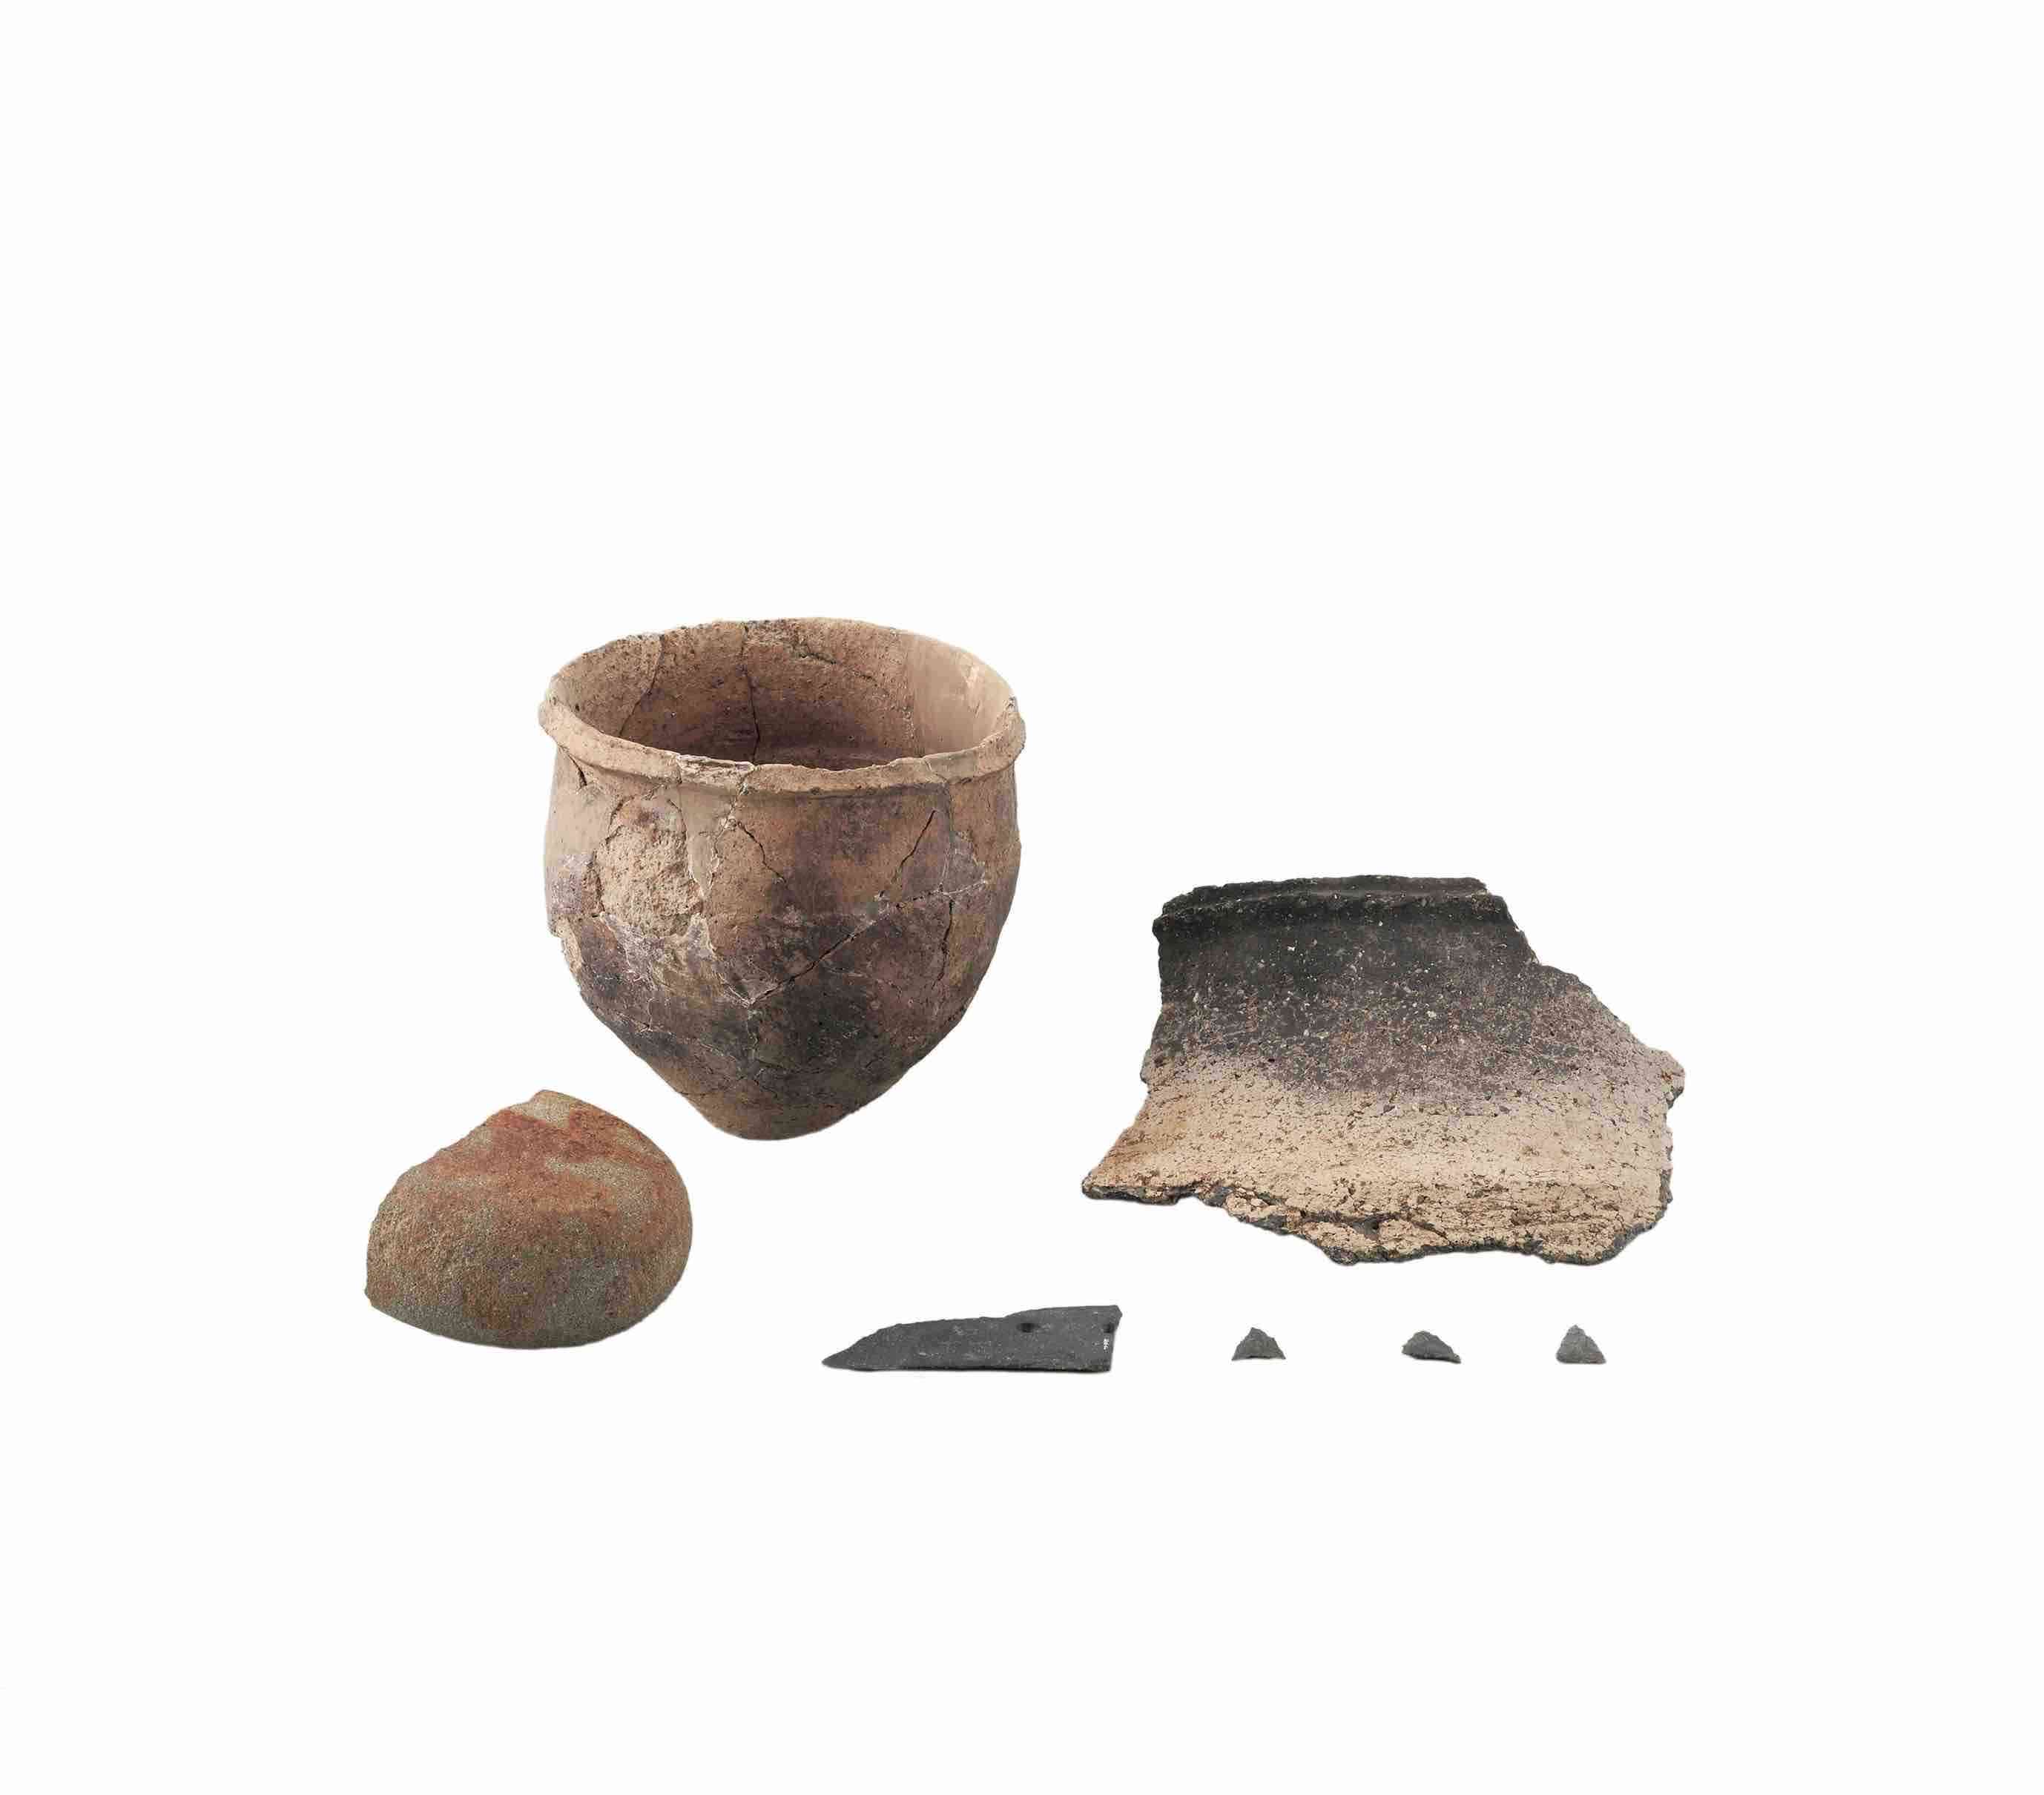 Materials excavated from under the Takakura no Miya site Jomon - Yayoi period, owned by The Museum of Kyoto